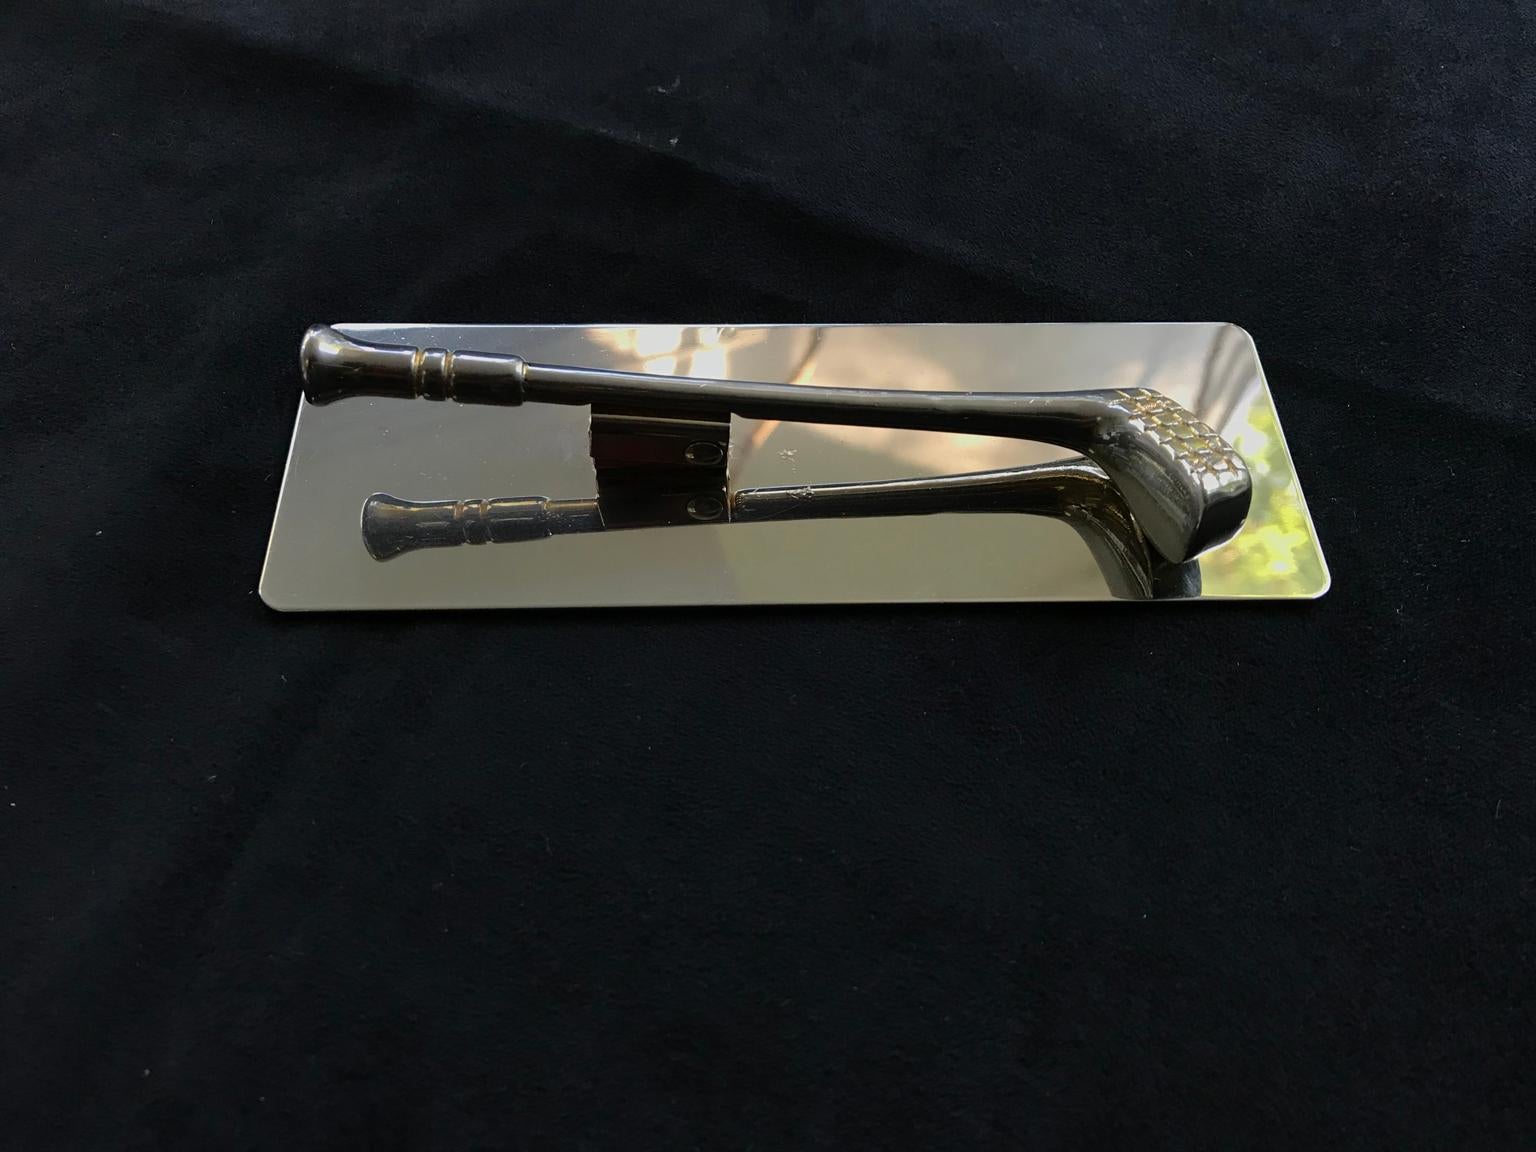 Mid-Century Modern desk accessory golf silver paperweight by Maison Lancel,  France, 1960s.
In an excellent condition.